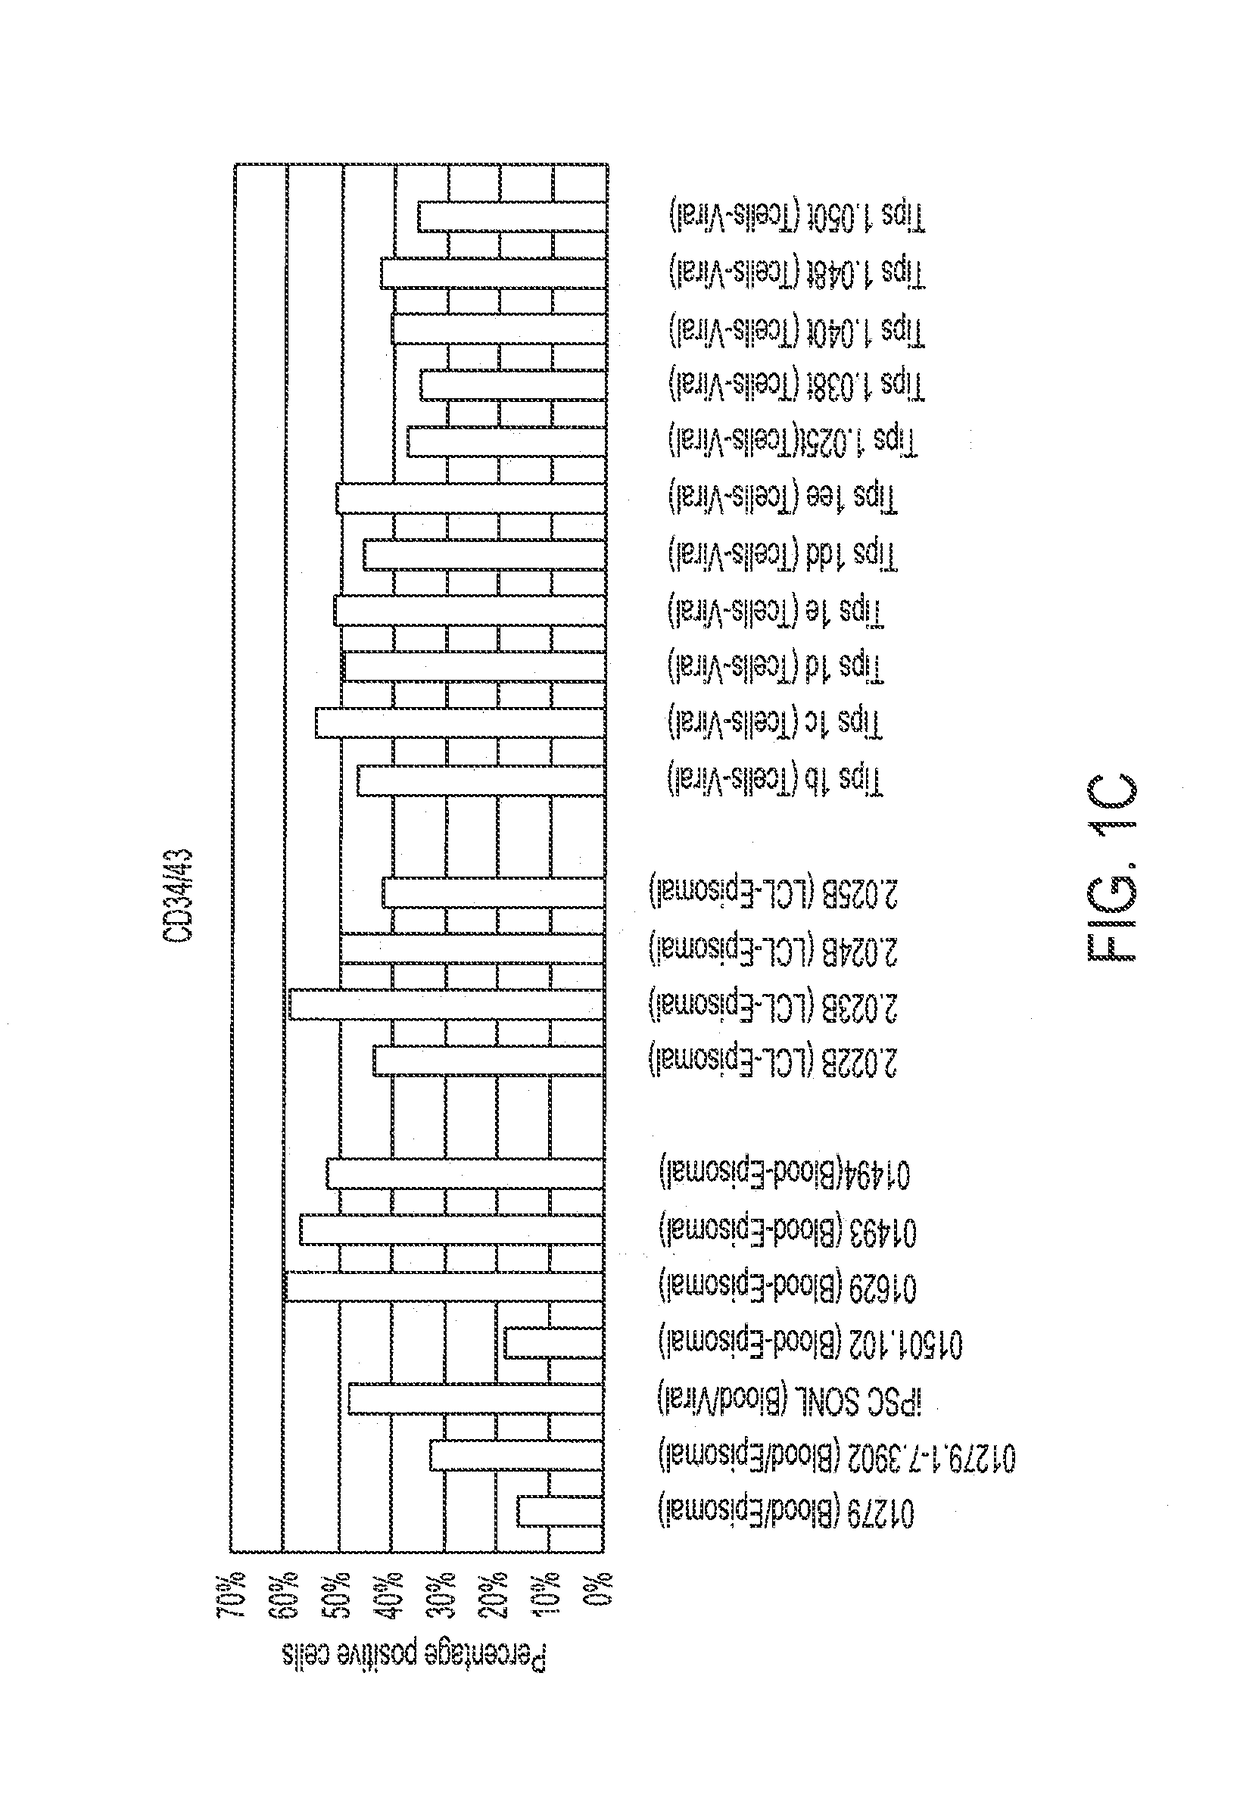 Methods for directed differentiation of pluripotent stem cells to immune cells